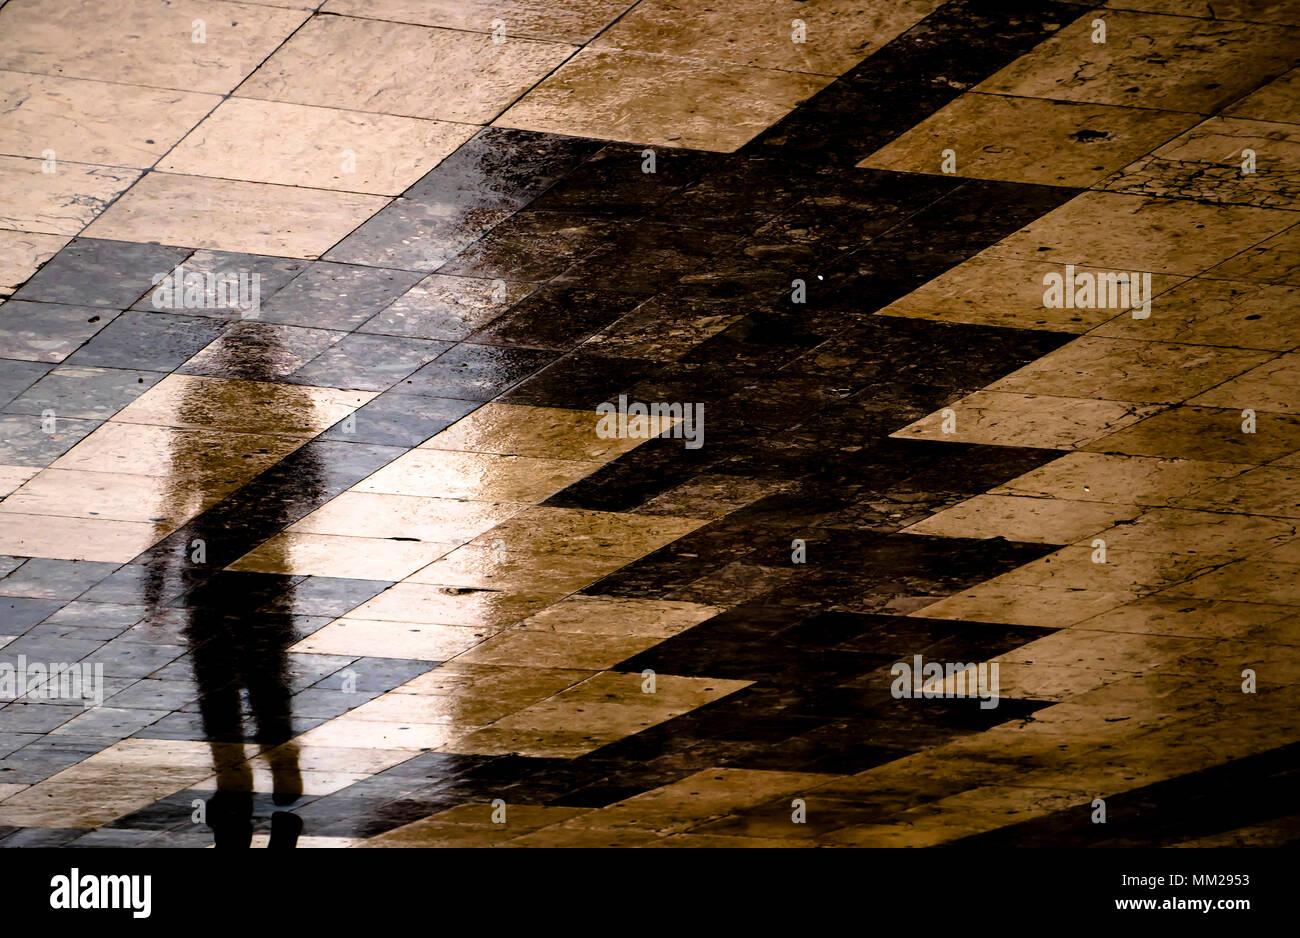 Blurry reflection shadow of one person walking the city street patterned sidewalk on a  rainy day Stock Photo